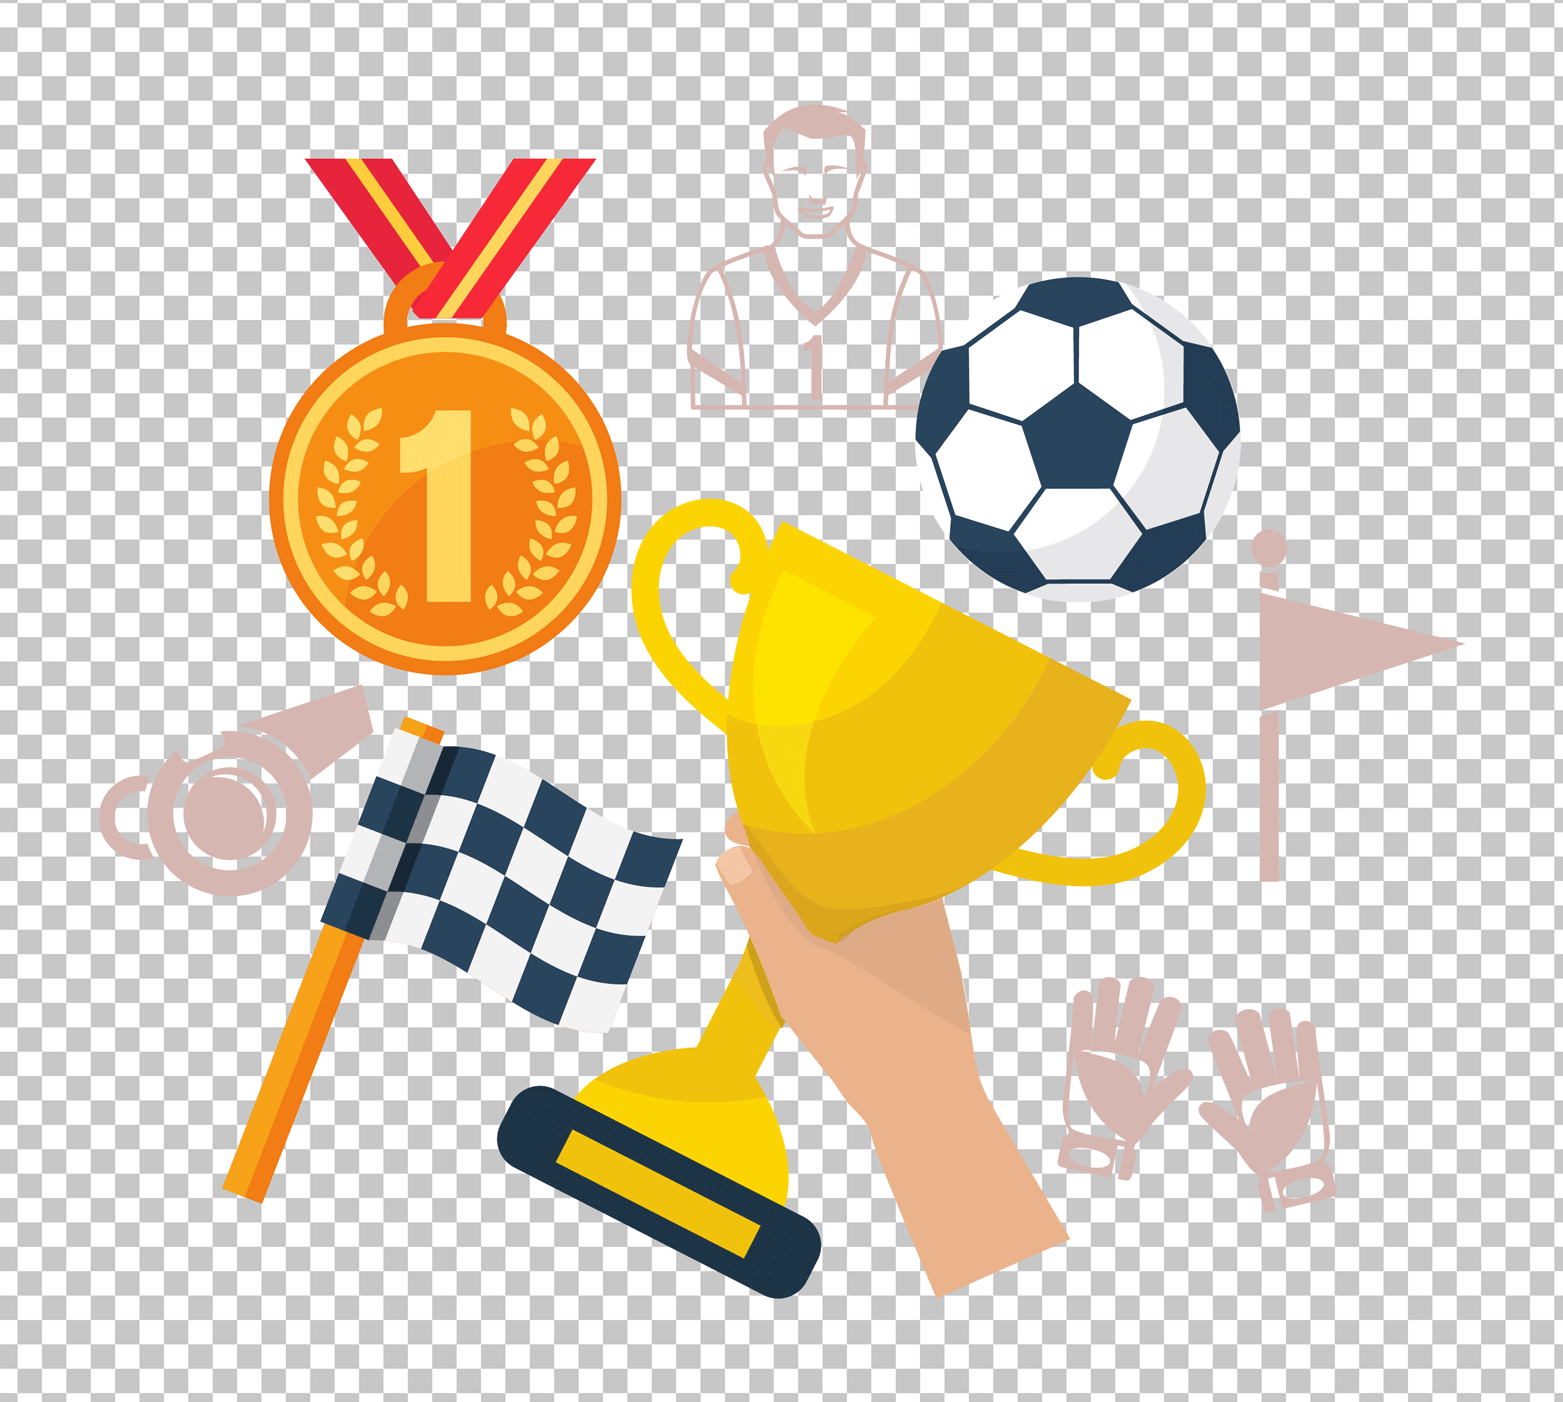 Hand Holding Trophy, Medal, Soccer Ball, and Checkered Flag PNG